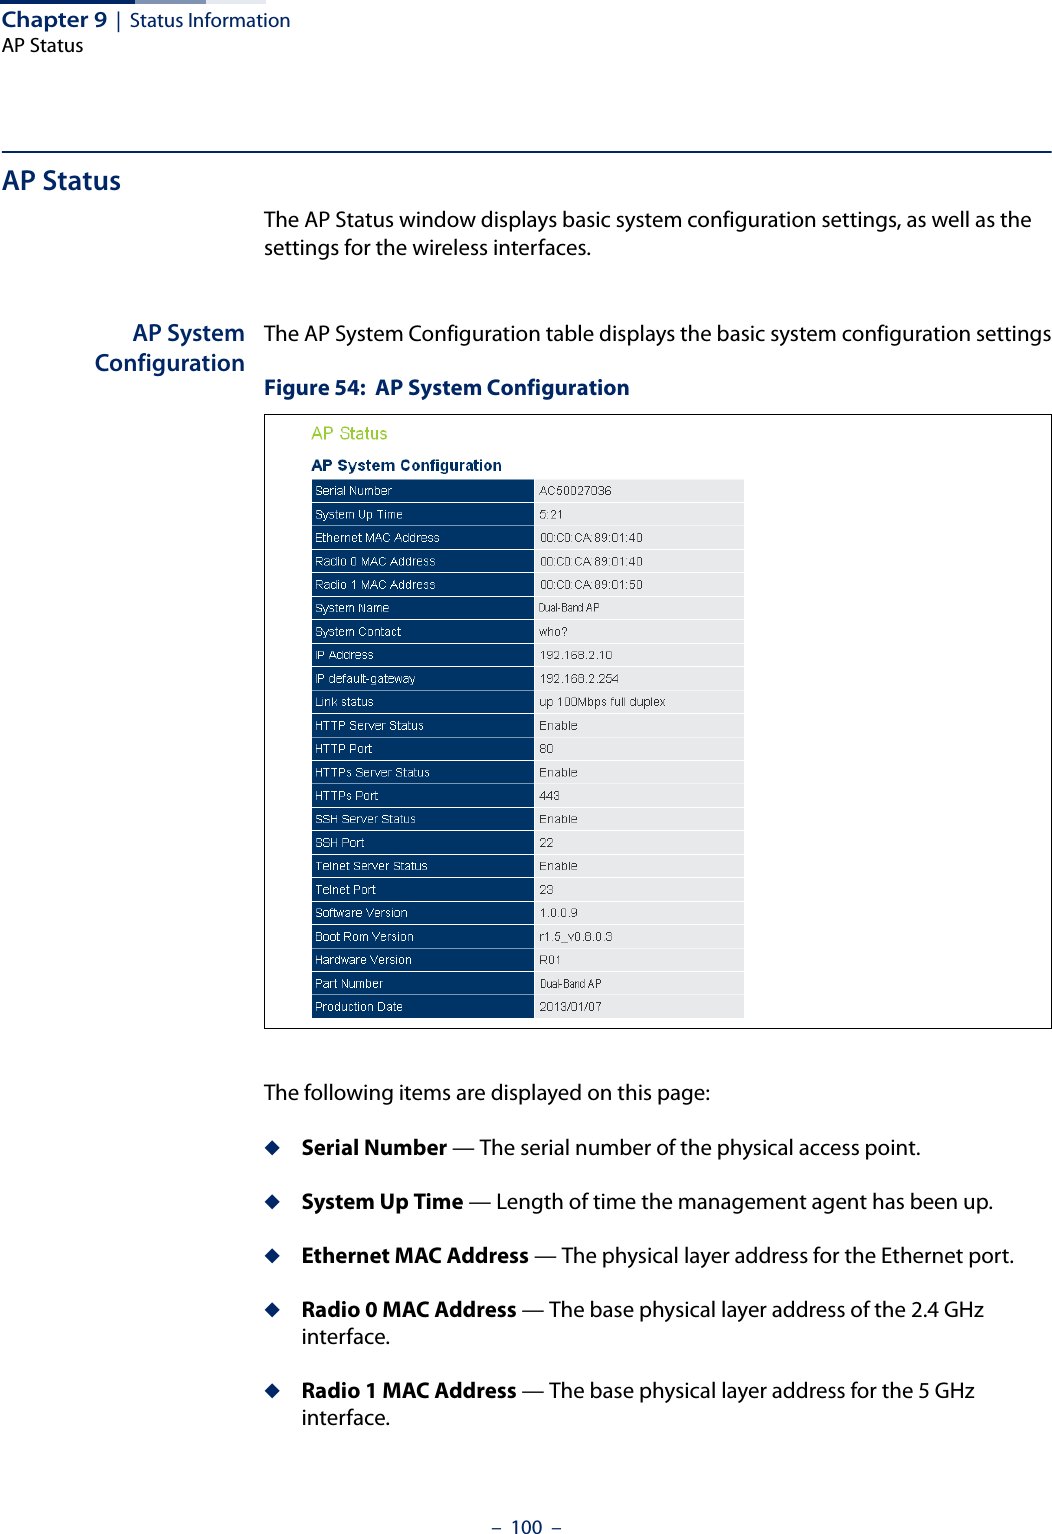 Chapter 9  |  Status InformationAP Status–  100  –AP StatusThe AP Status window displays basic system configuration settings, as well as the settings for the wireless interfaces.AP SystemConfigurationThe AP System Configuration table displays the basic system configuration settingsFigure 54:  AP System ConfigurationThe following items are displayed on this page:◆Serial Number — The serial number of the physical access point.◆System Up Time — Length of time the management agent has been up.◆Ethernet MAC Address — The physical layer address for the Ethernet port.◆Radio 0 MAC Address — The base physical layer address of the 2.4 GHz interface.◆Radio 1 MAC Address — The base physical layer address for the 5 GHz interface.